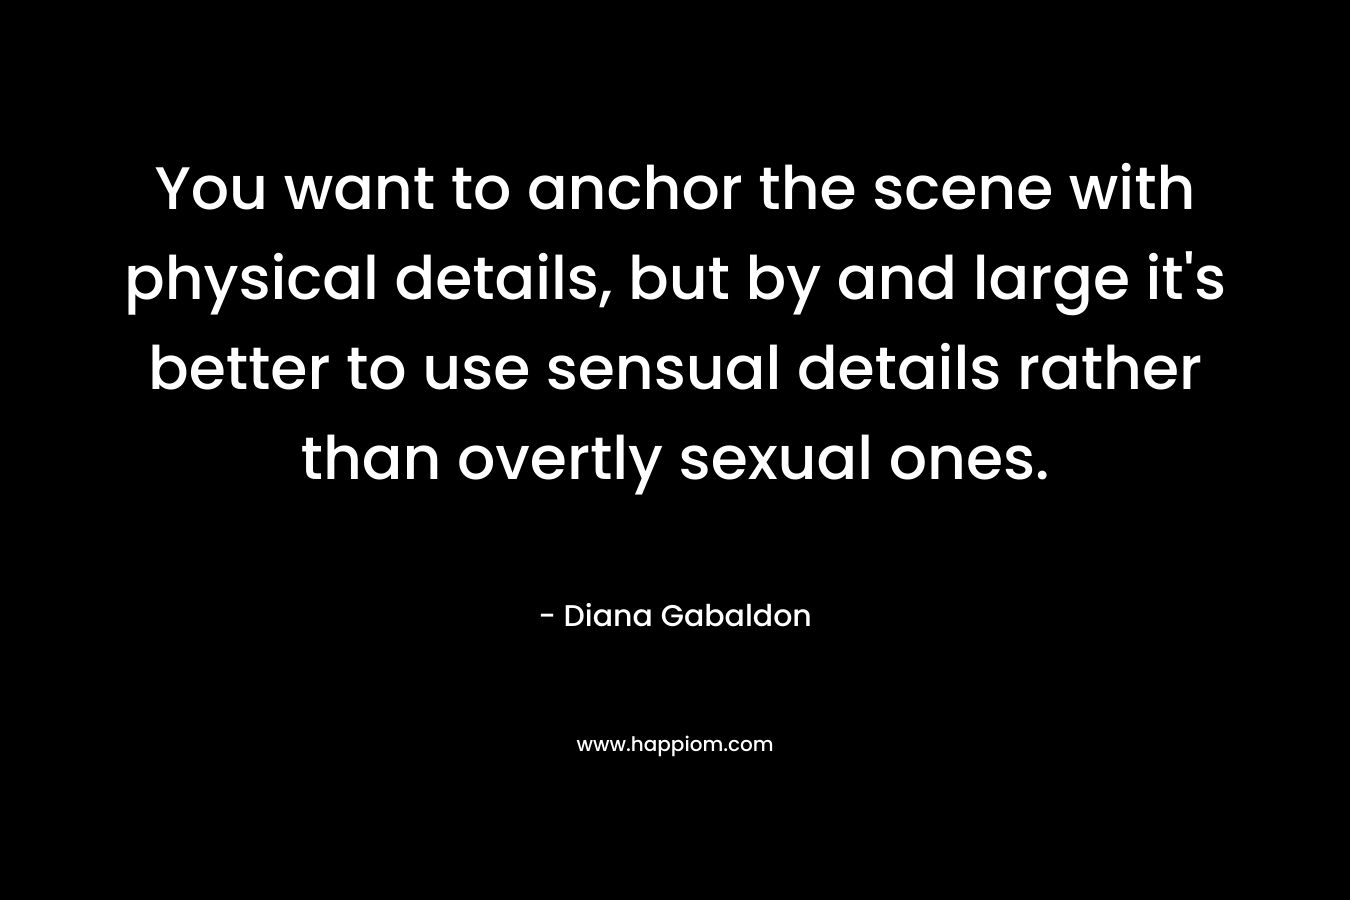 You want to anchor the scene with physical details, but by and large it's better to use sensual details rather than overtly sexual ones.